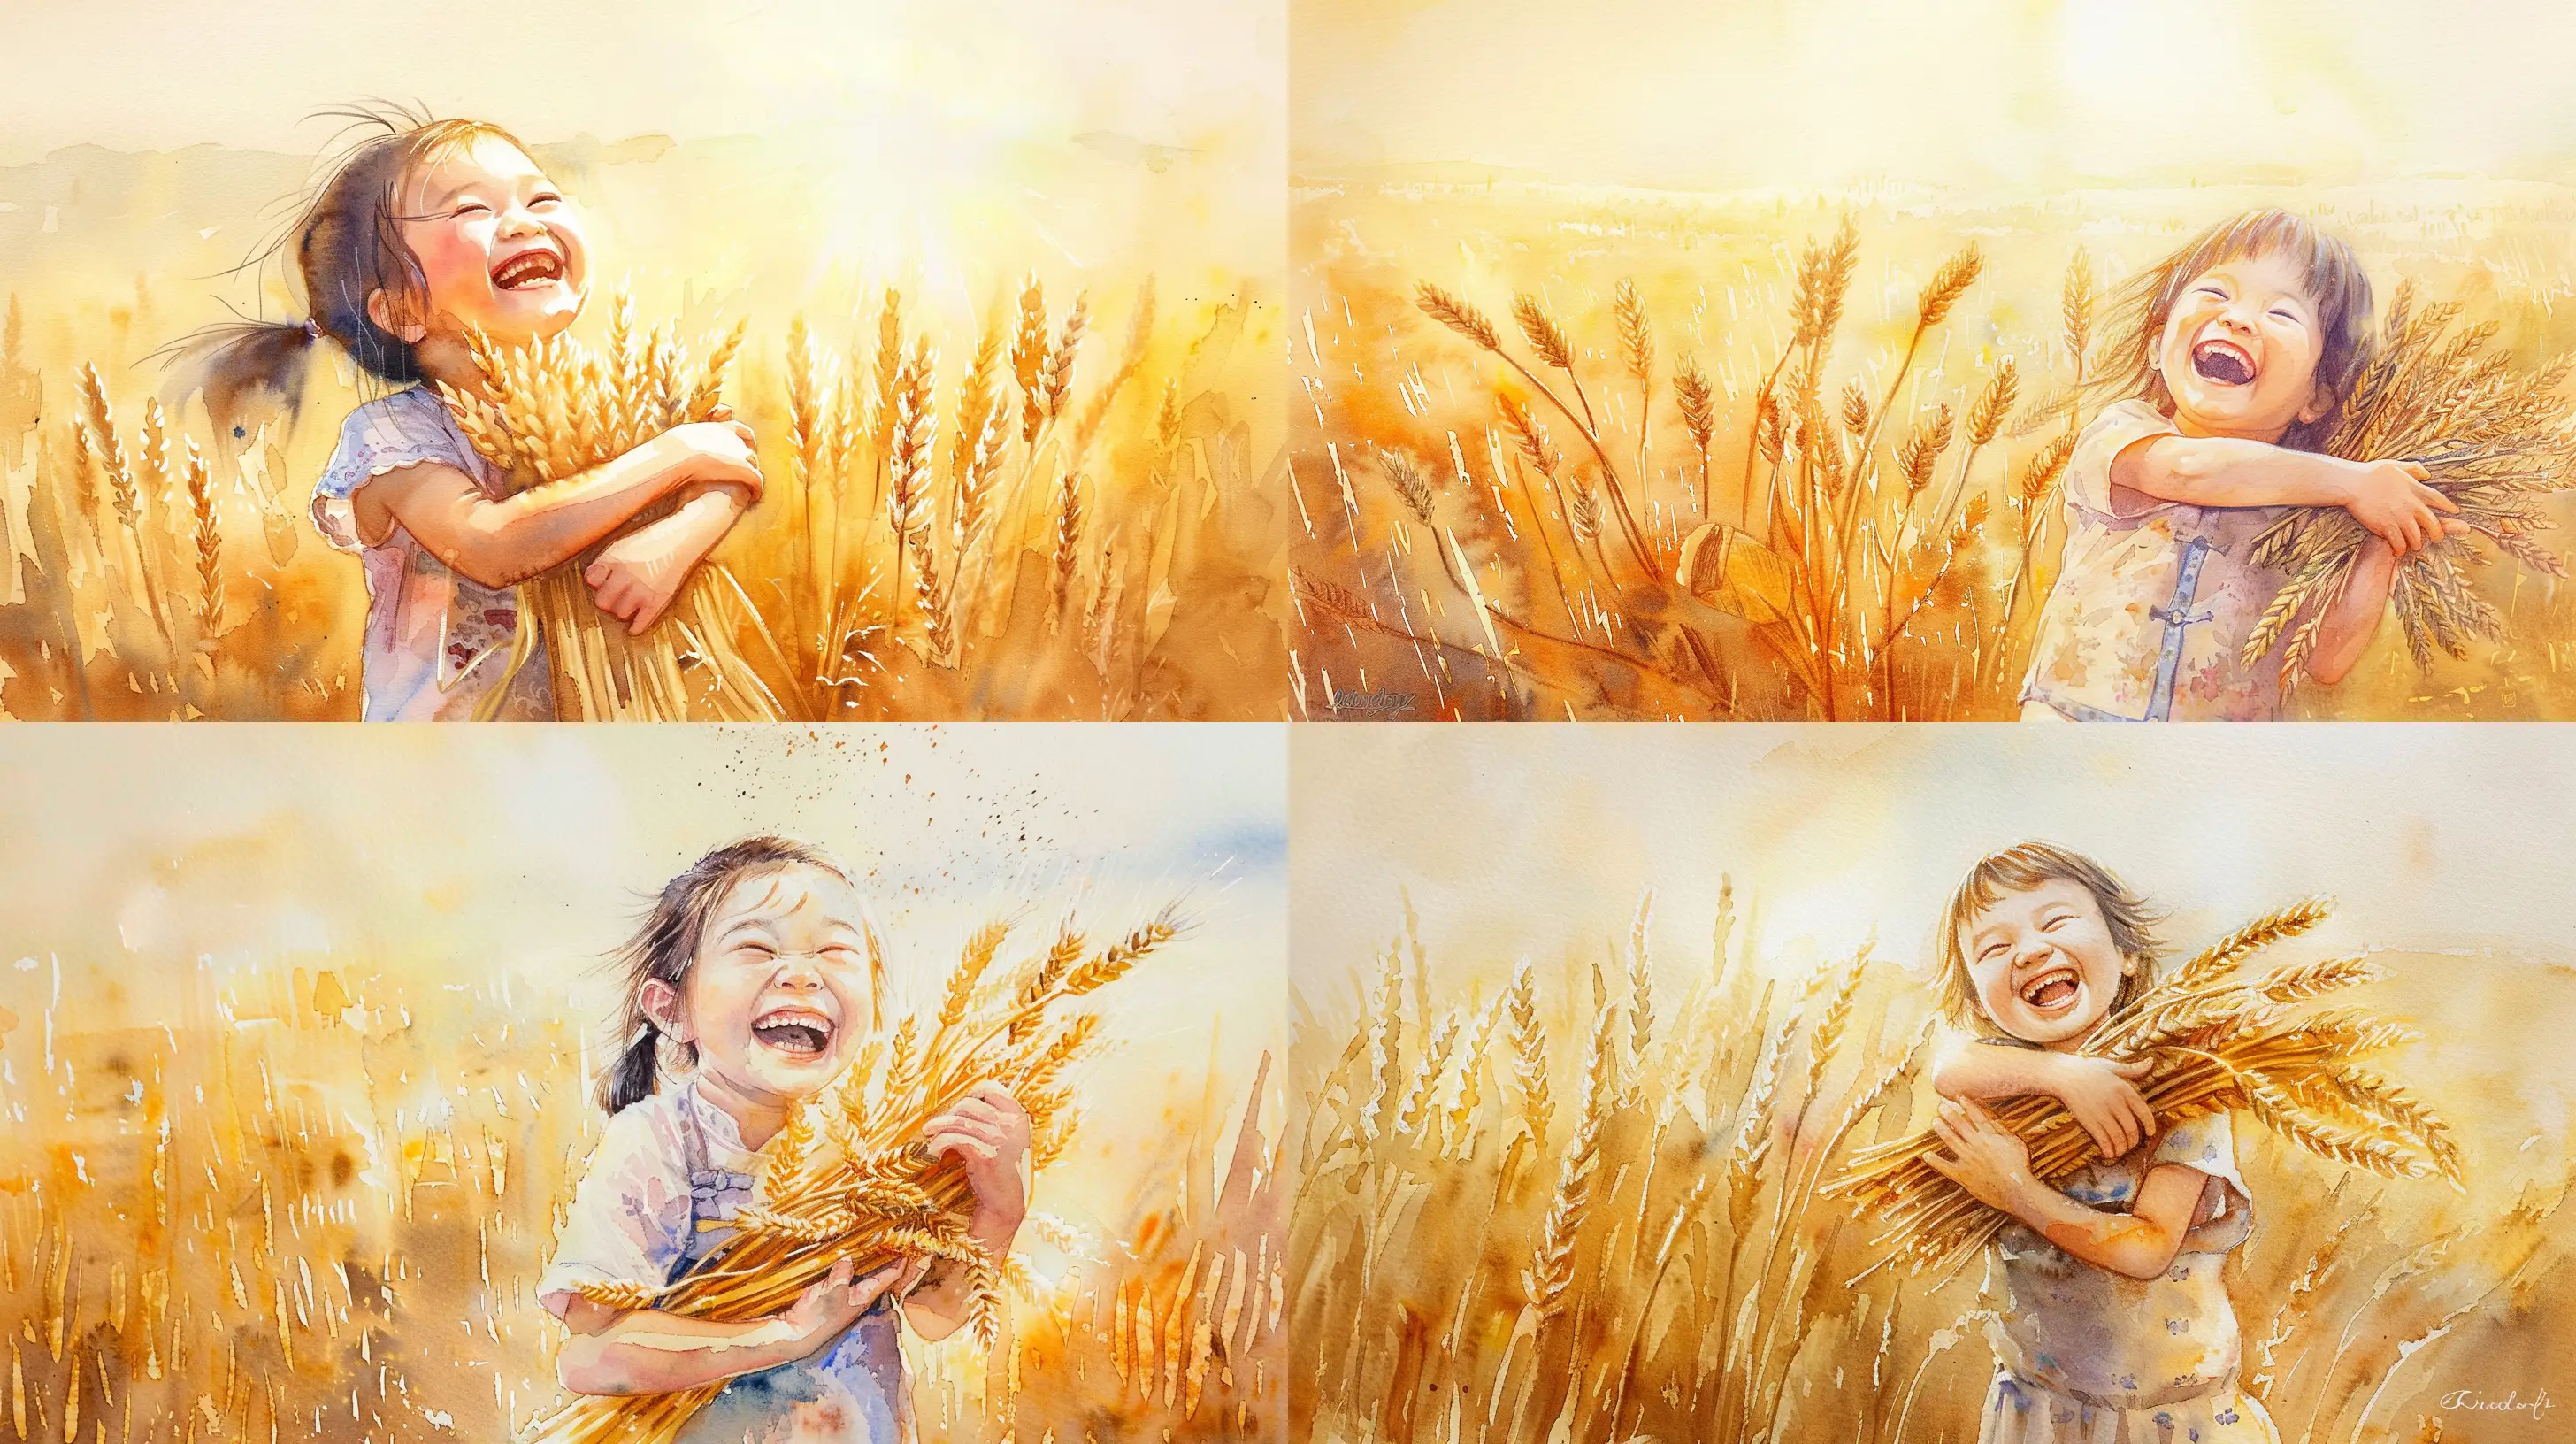 Create a watercolor painting of a joyful Chinese little girl embracing a bundle of wheat in a golden wheat field. The girl is laughing heartily, her hair gently tousled by a soft breeze. She is dressed in a simple, elegant outfit that reflects her cultural background. Sunlight bathes her and the wheat stalks, casting warm glows and creating a serene, golden atmosphere. The background should show the expanse of the wheat field stretching into the distance, with the sky above painted in soft, pastel hues to complement the golden tones of the field --ar 16:9